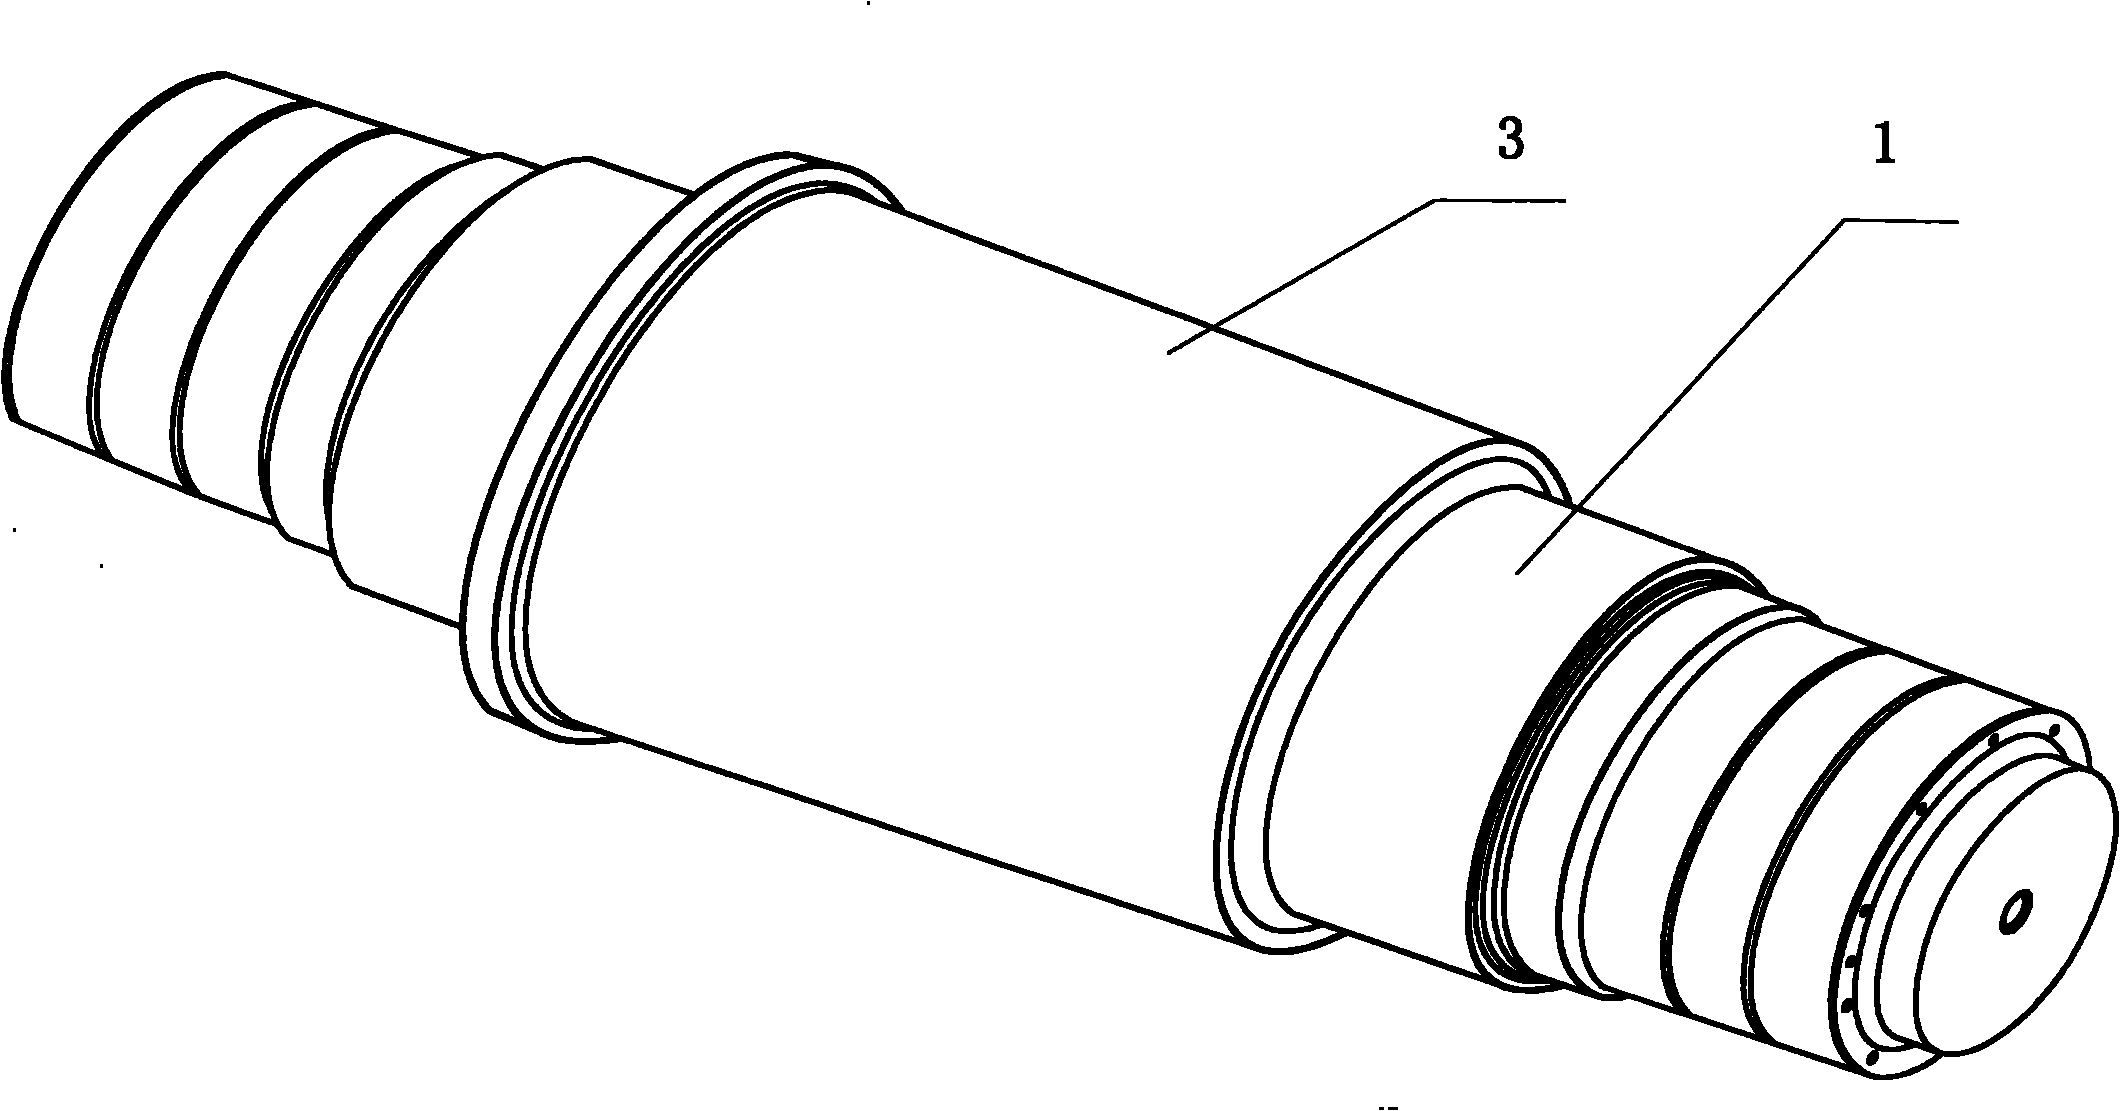 Split-type squeeze roller assembly structure and assembly method